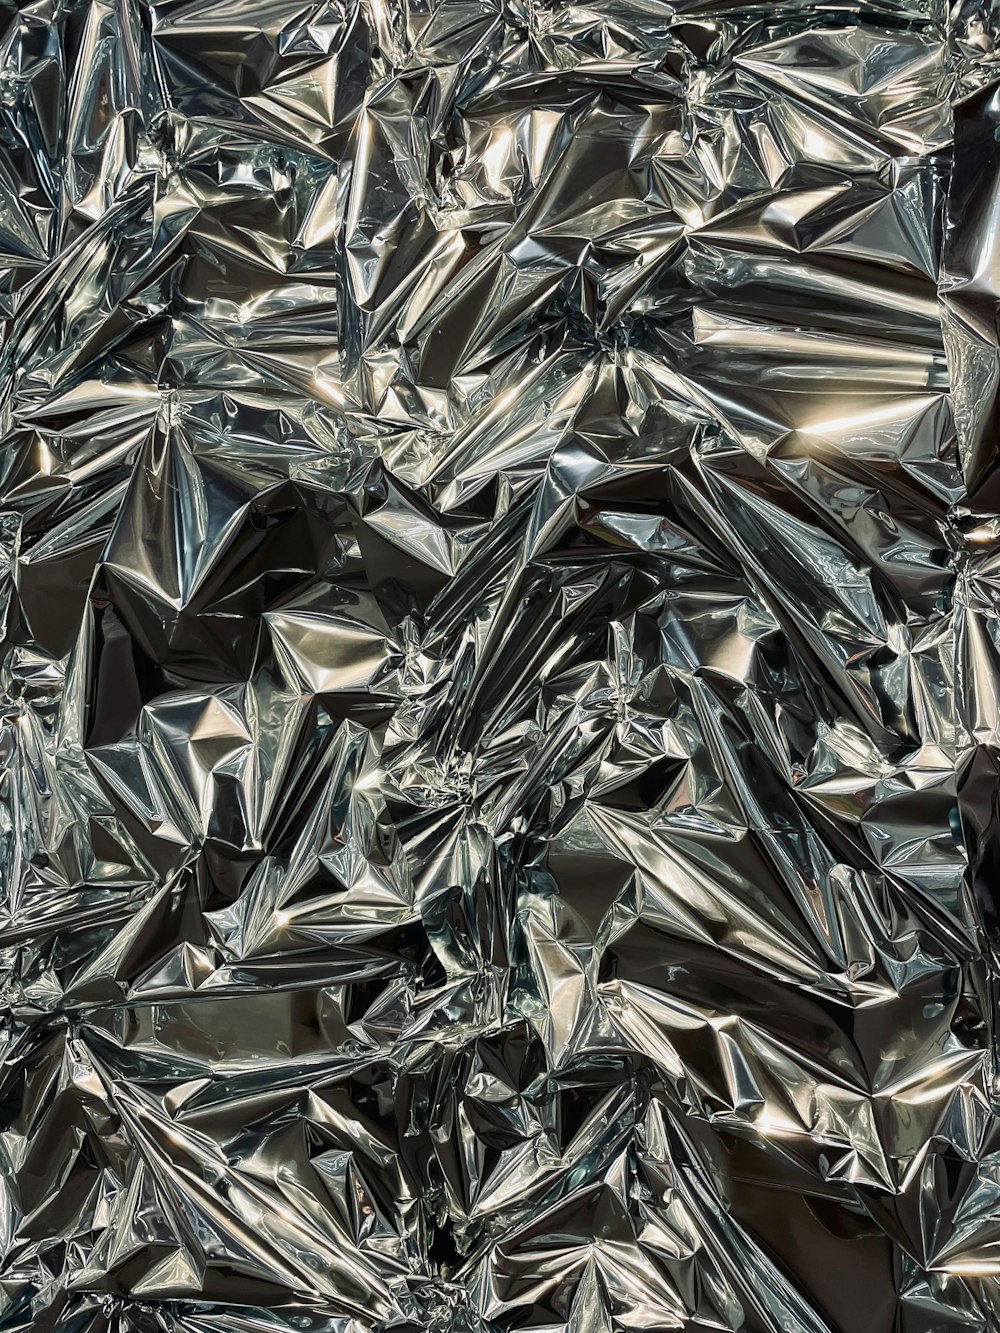 a large pile of shiny silver foil